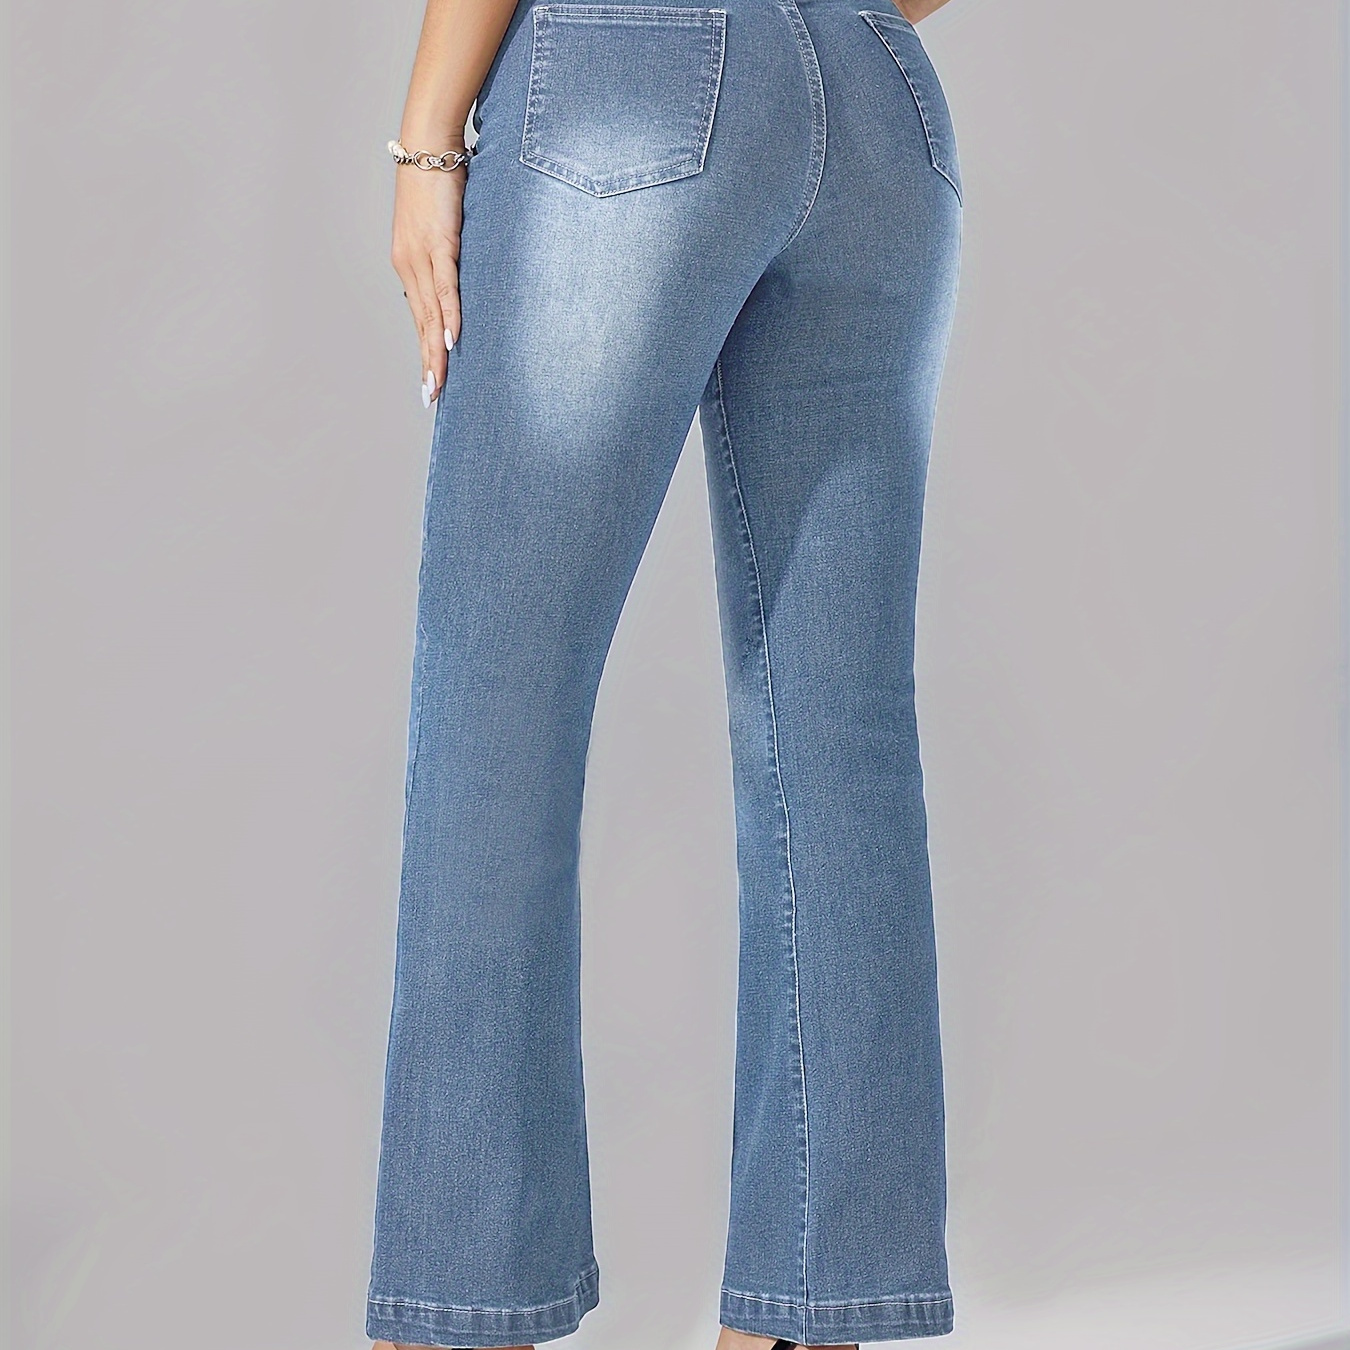 

High-waisted Stretchy Denim Jeans For Women, Mid-rise, Relaxed Fit, Classic Style, Straight Leg, High-rise, Elastic Waist Casual Wear For Fall